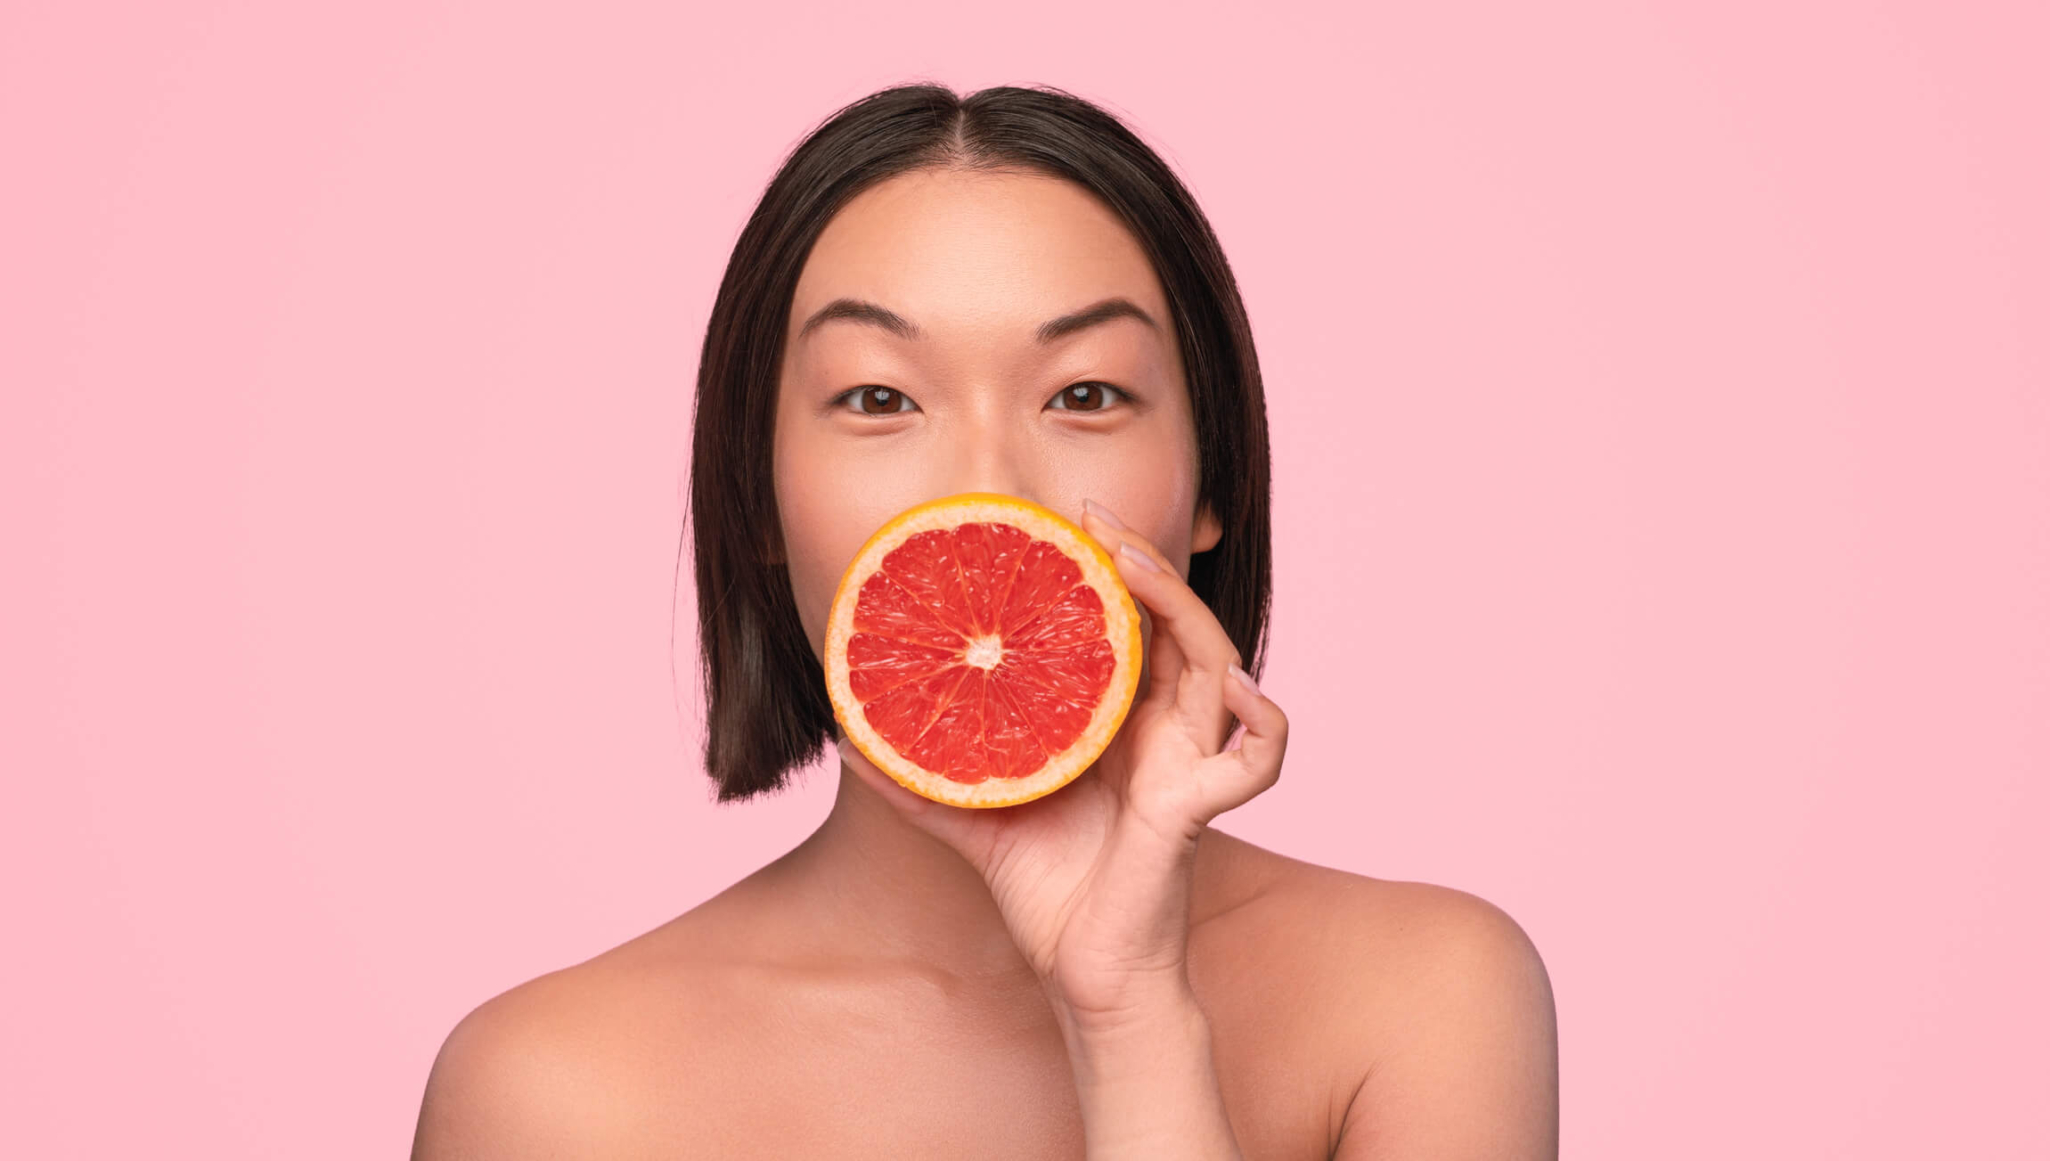 Young woman holding a red grapefruit over her face with a pink background.